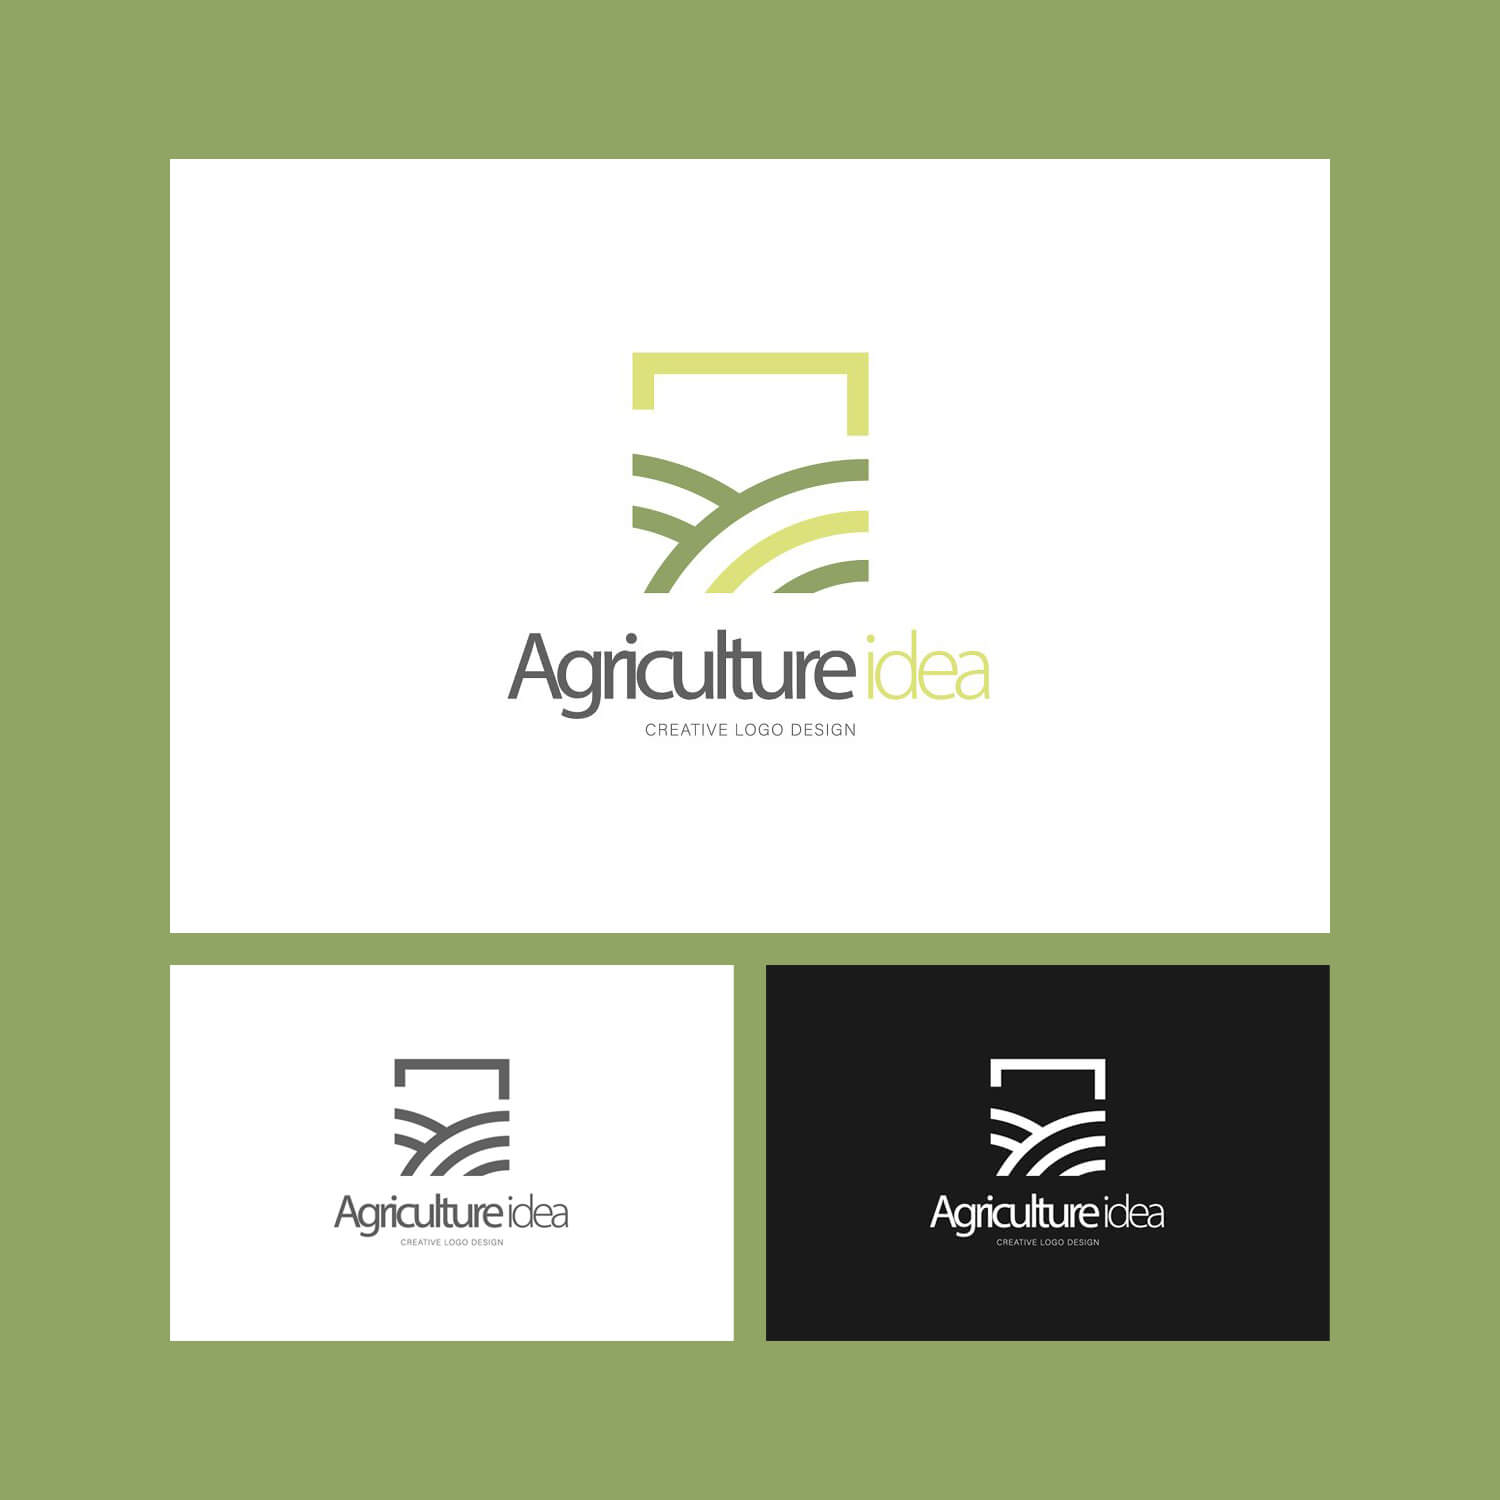 The inscription agriculture idea, two images on a white background and one image on a black background.